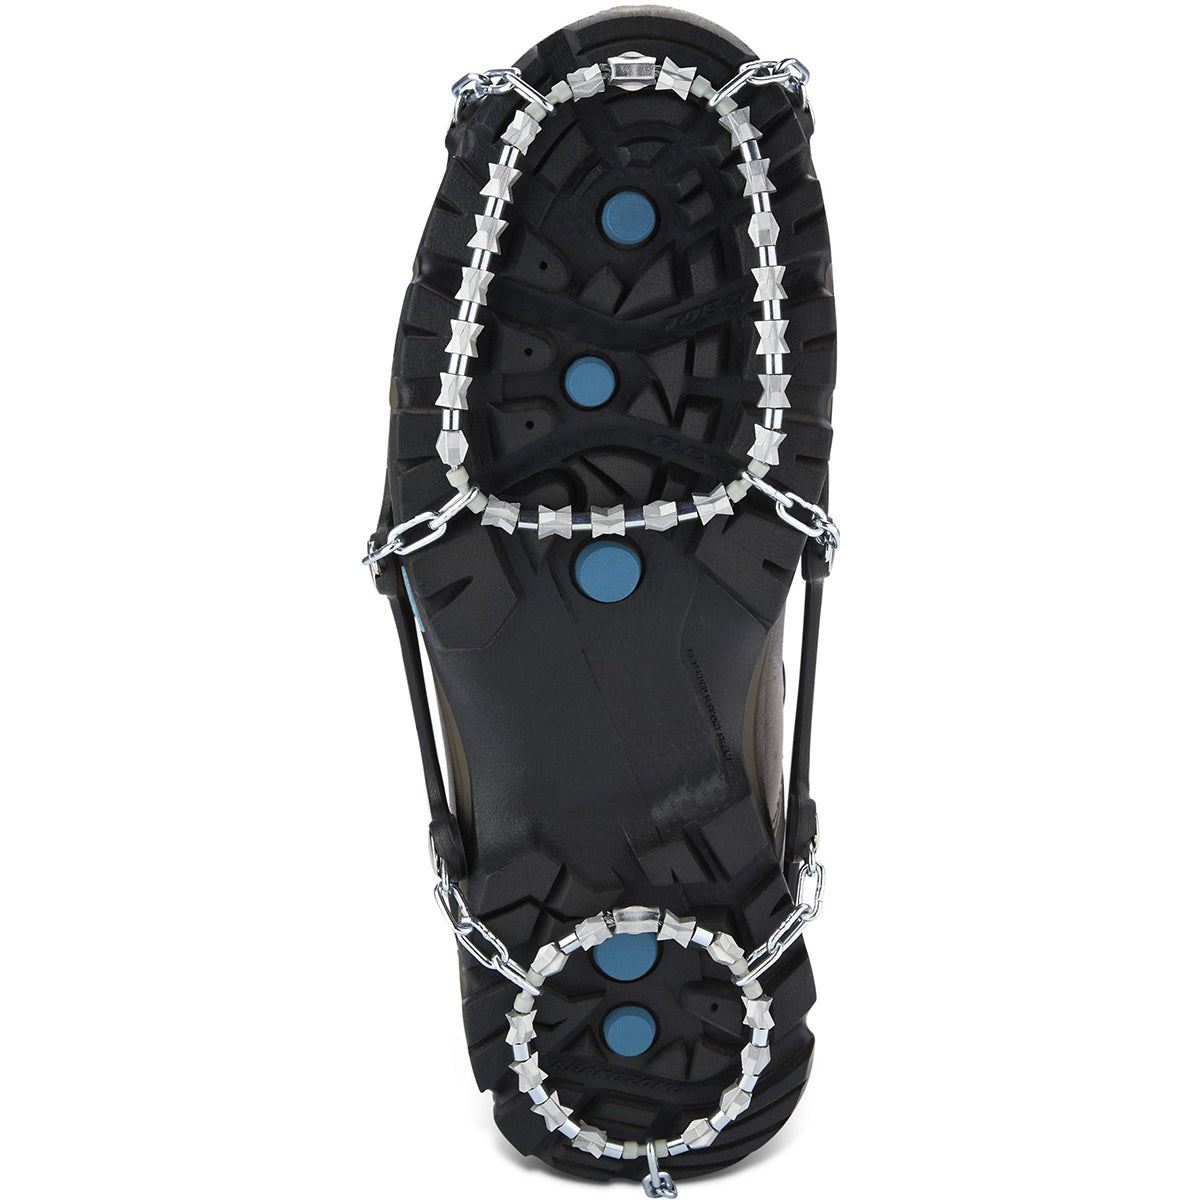 Yaktrax Diamond Grip Winter Traction Clears for Snow and Ice - Black Yaktrax